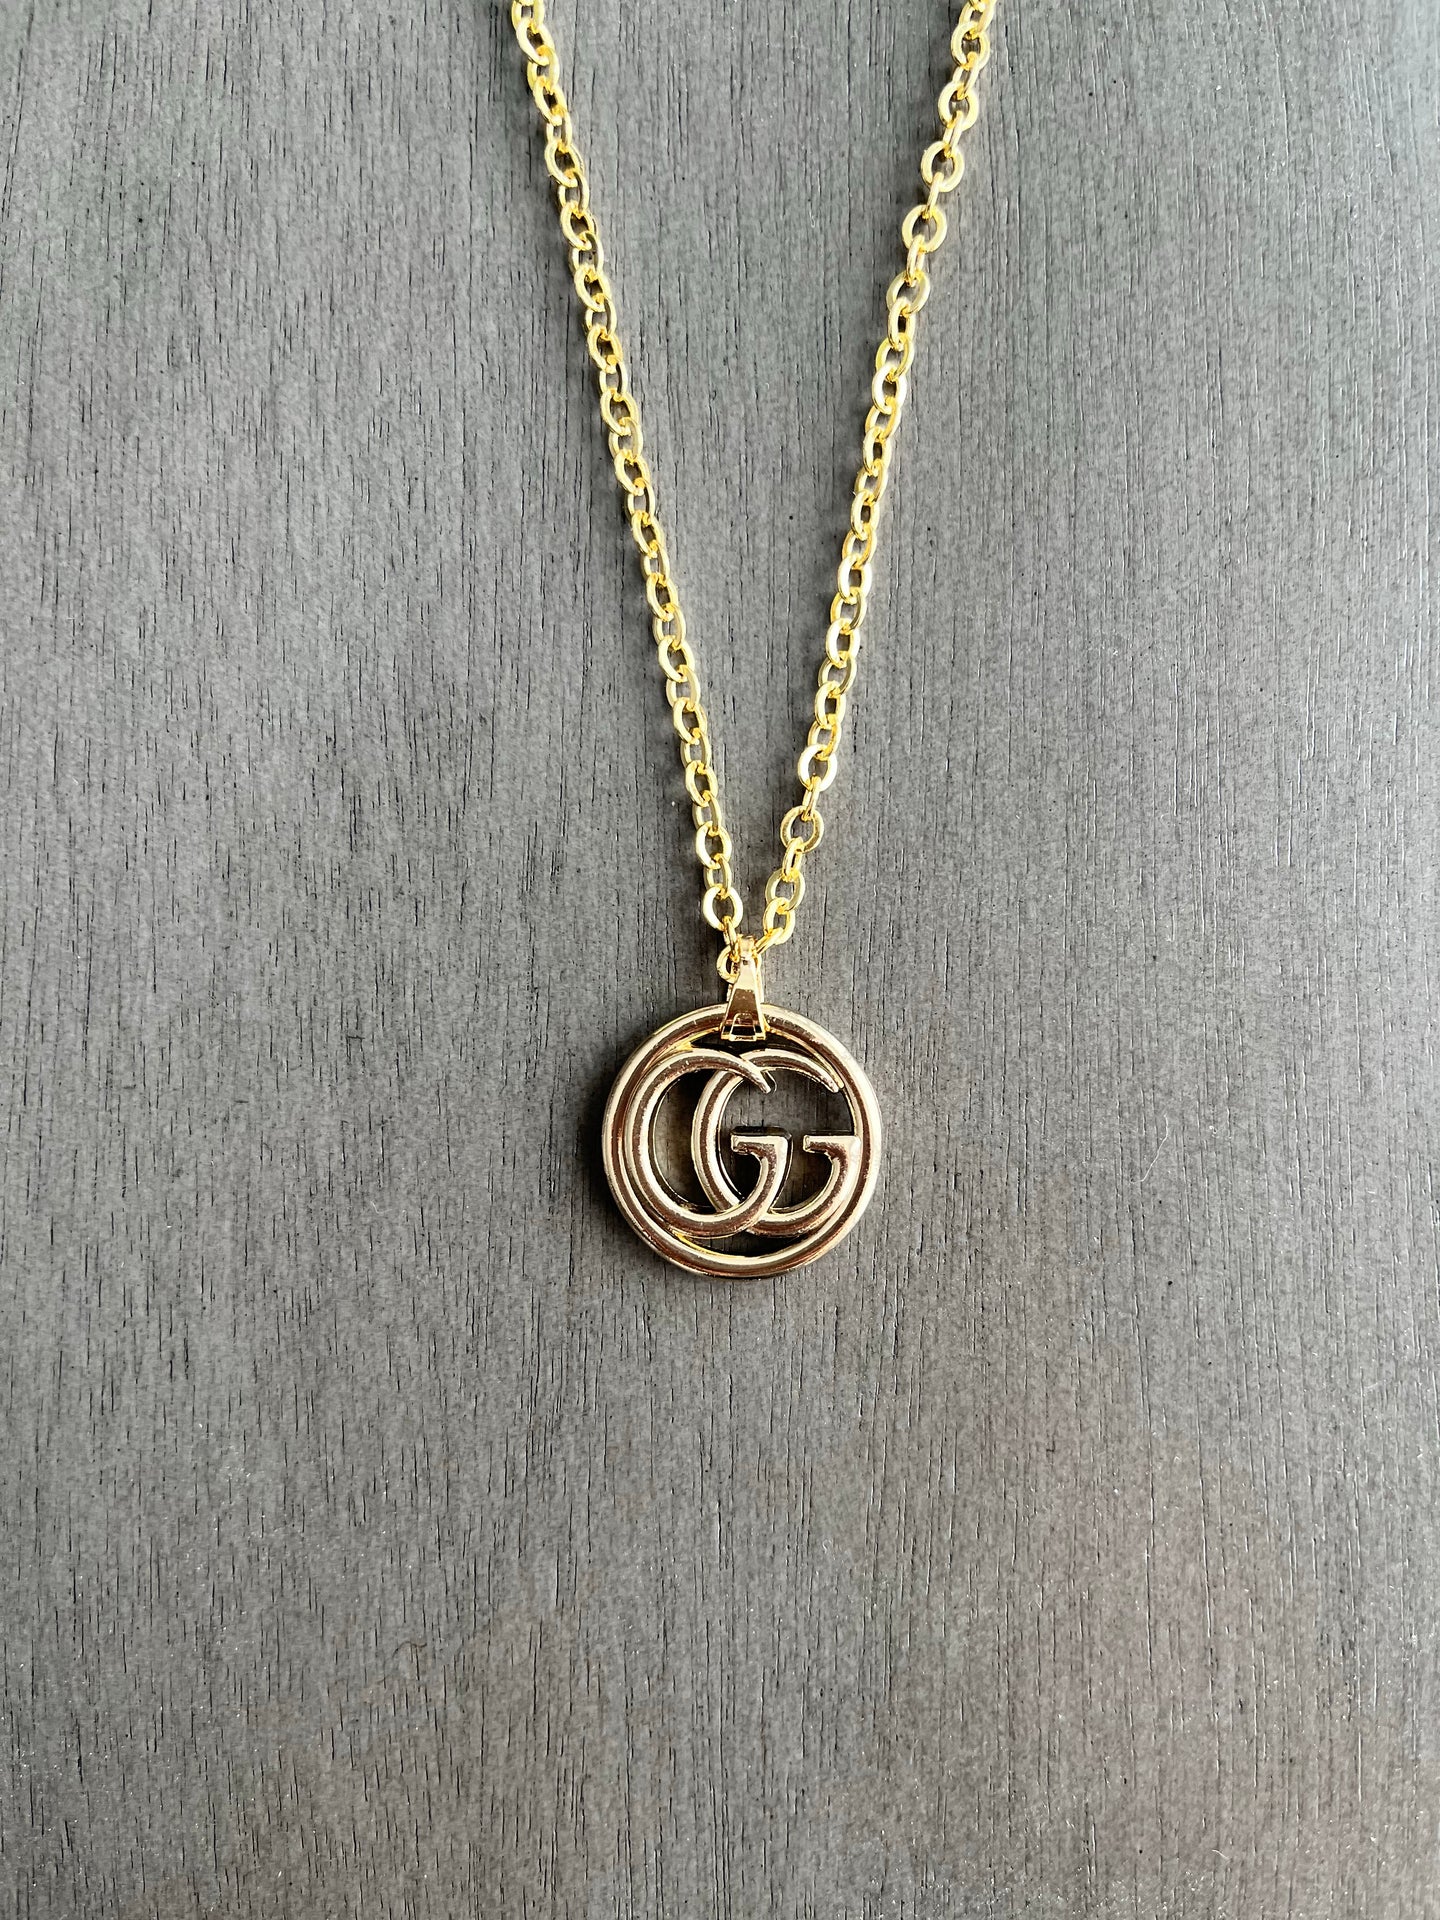 Upcycled Designer Gucci Gold Pendant